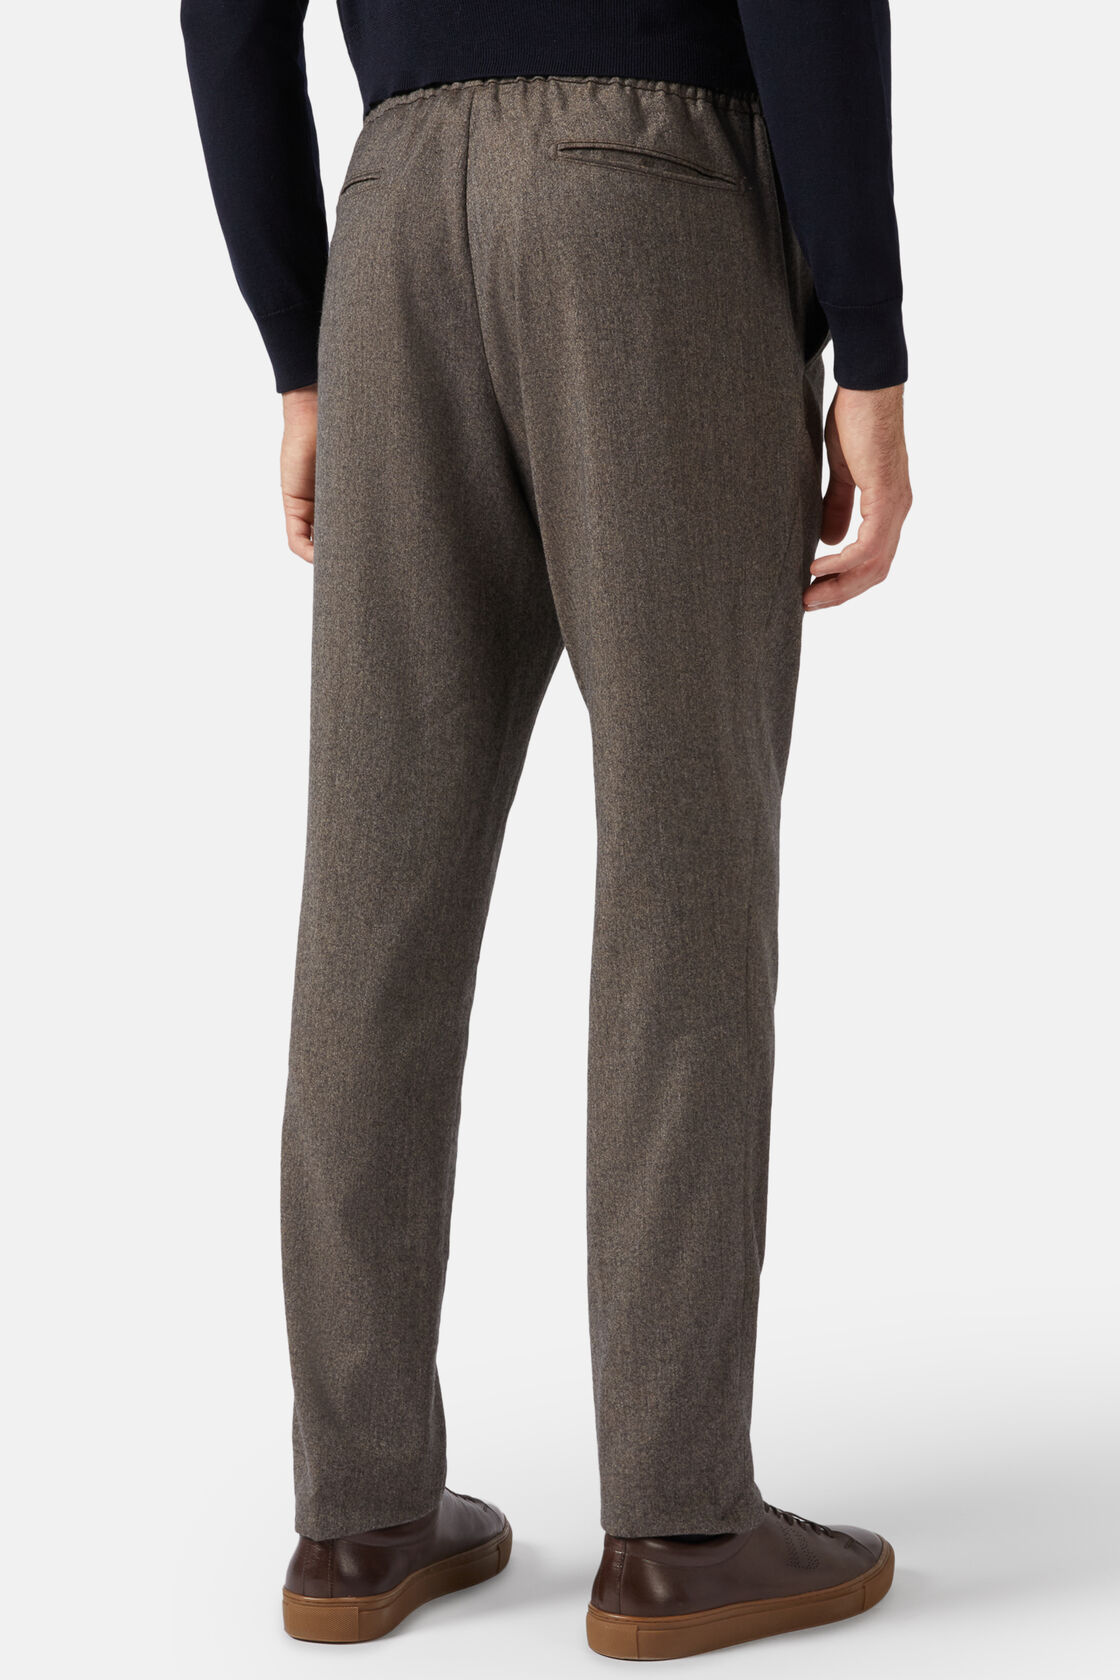 City Trousers in Flannel, Taupe, hi-res